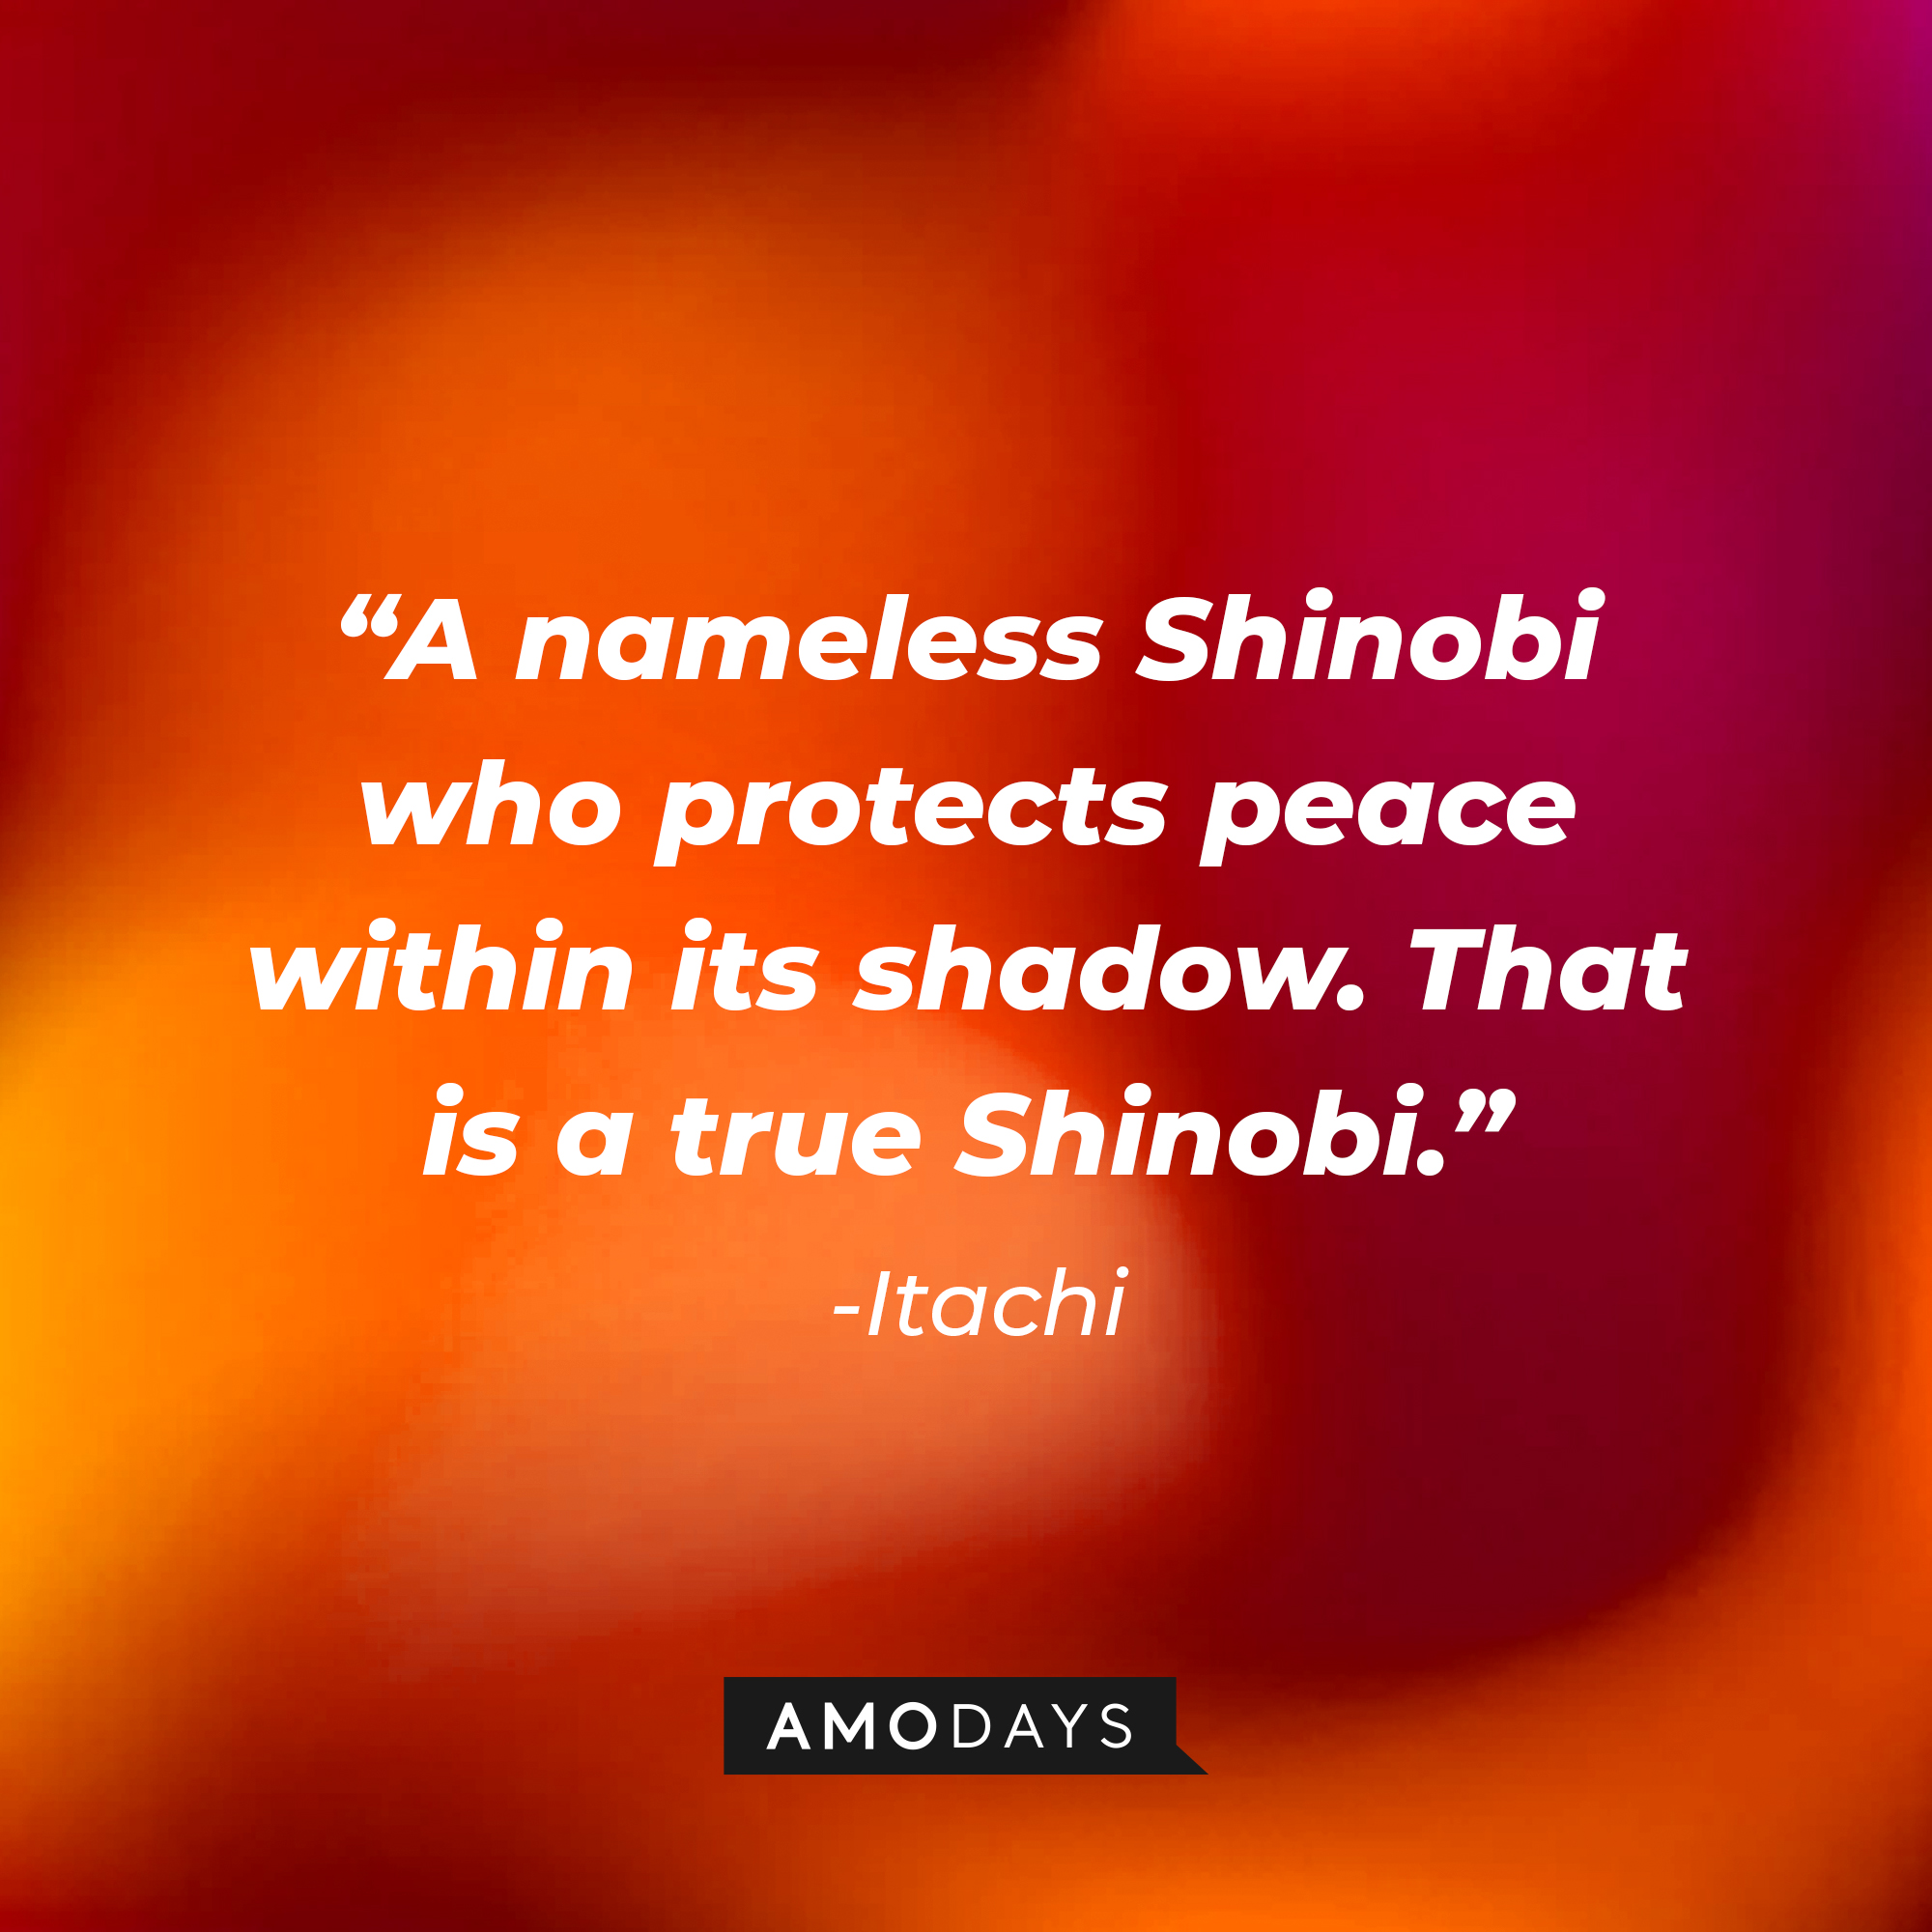 "A nameless Shinobi who protects peace within its shadow. That is a true Shinobi.”